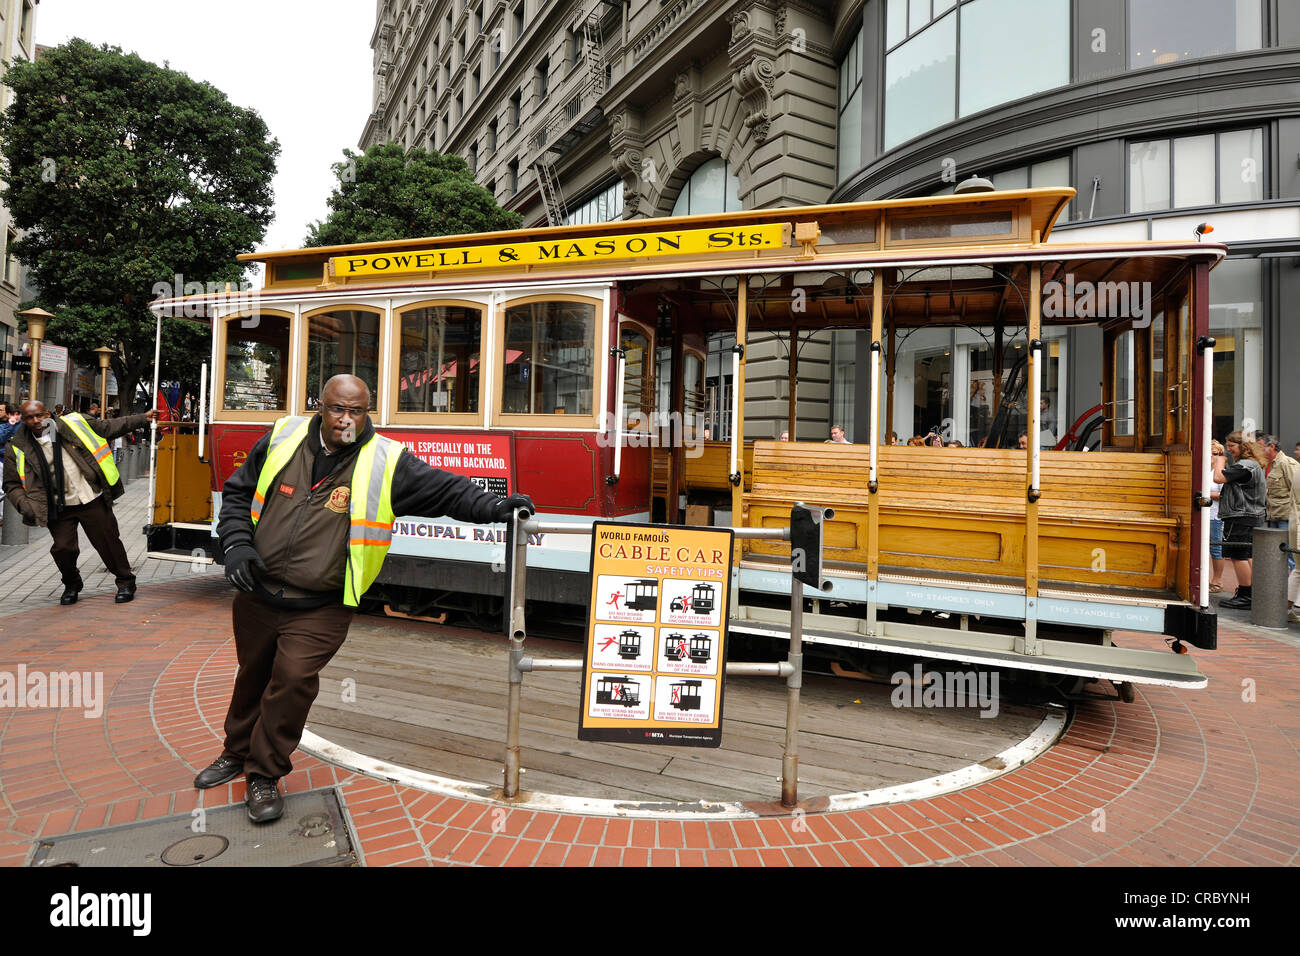 Turning maneuvers, Cable Car Turning Point, cable tramway, Powell and Mason Street, San Francisco, California Stock Photo